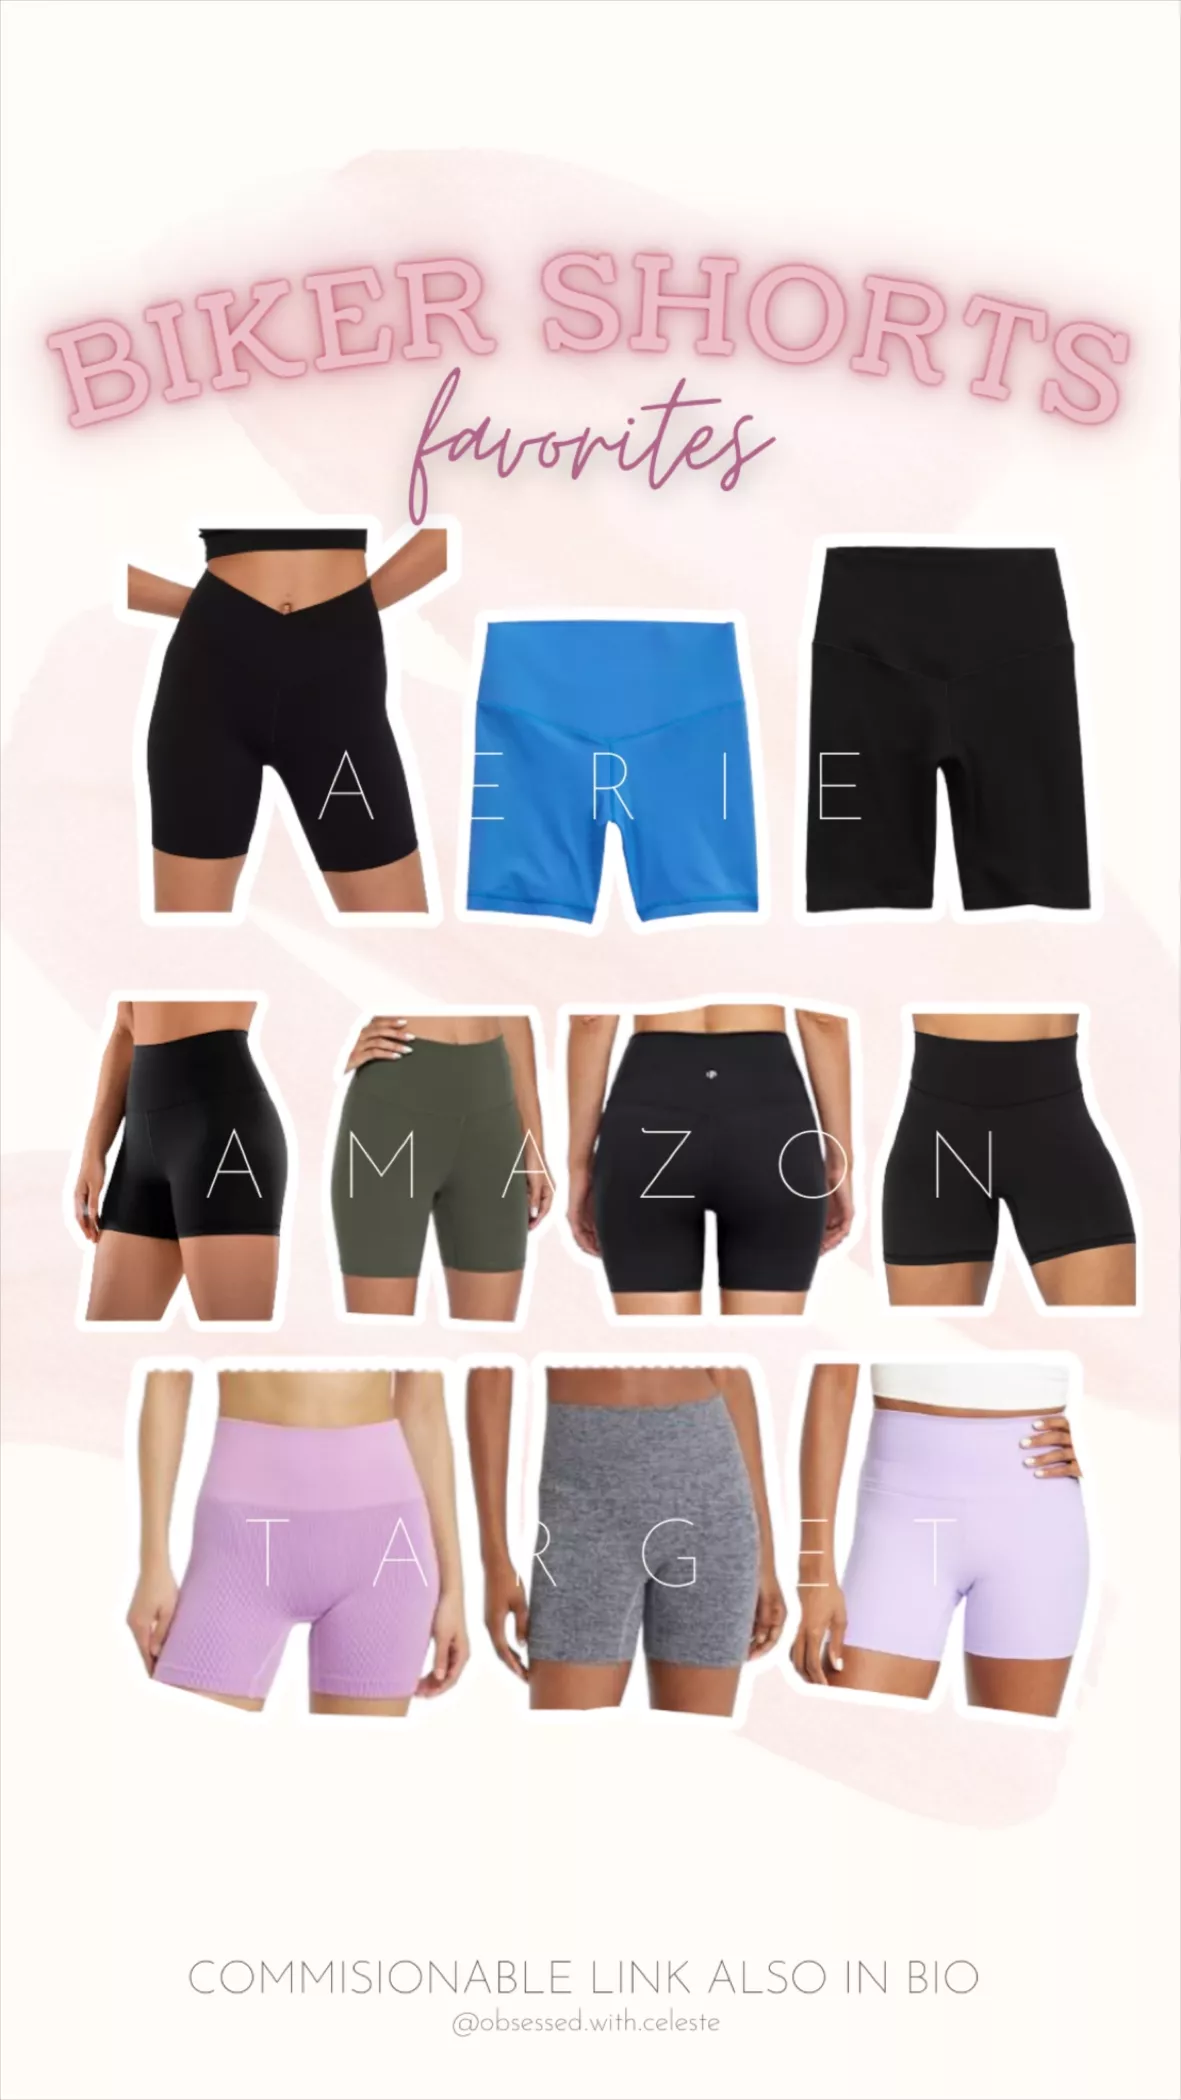 Brand is CRZ Yoga & linked on my storefront 🤩 i want this set it